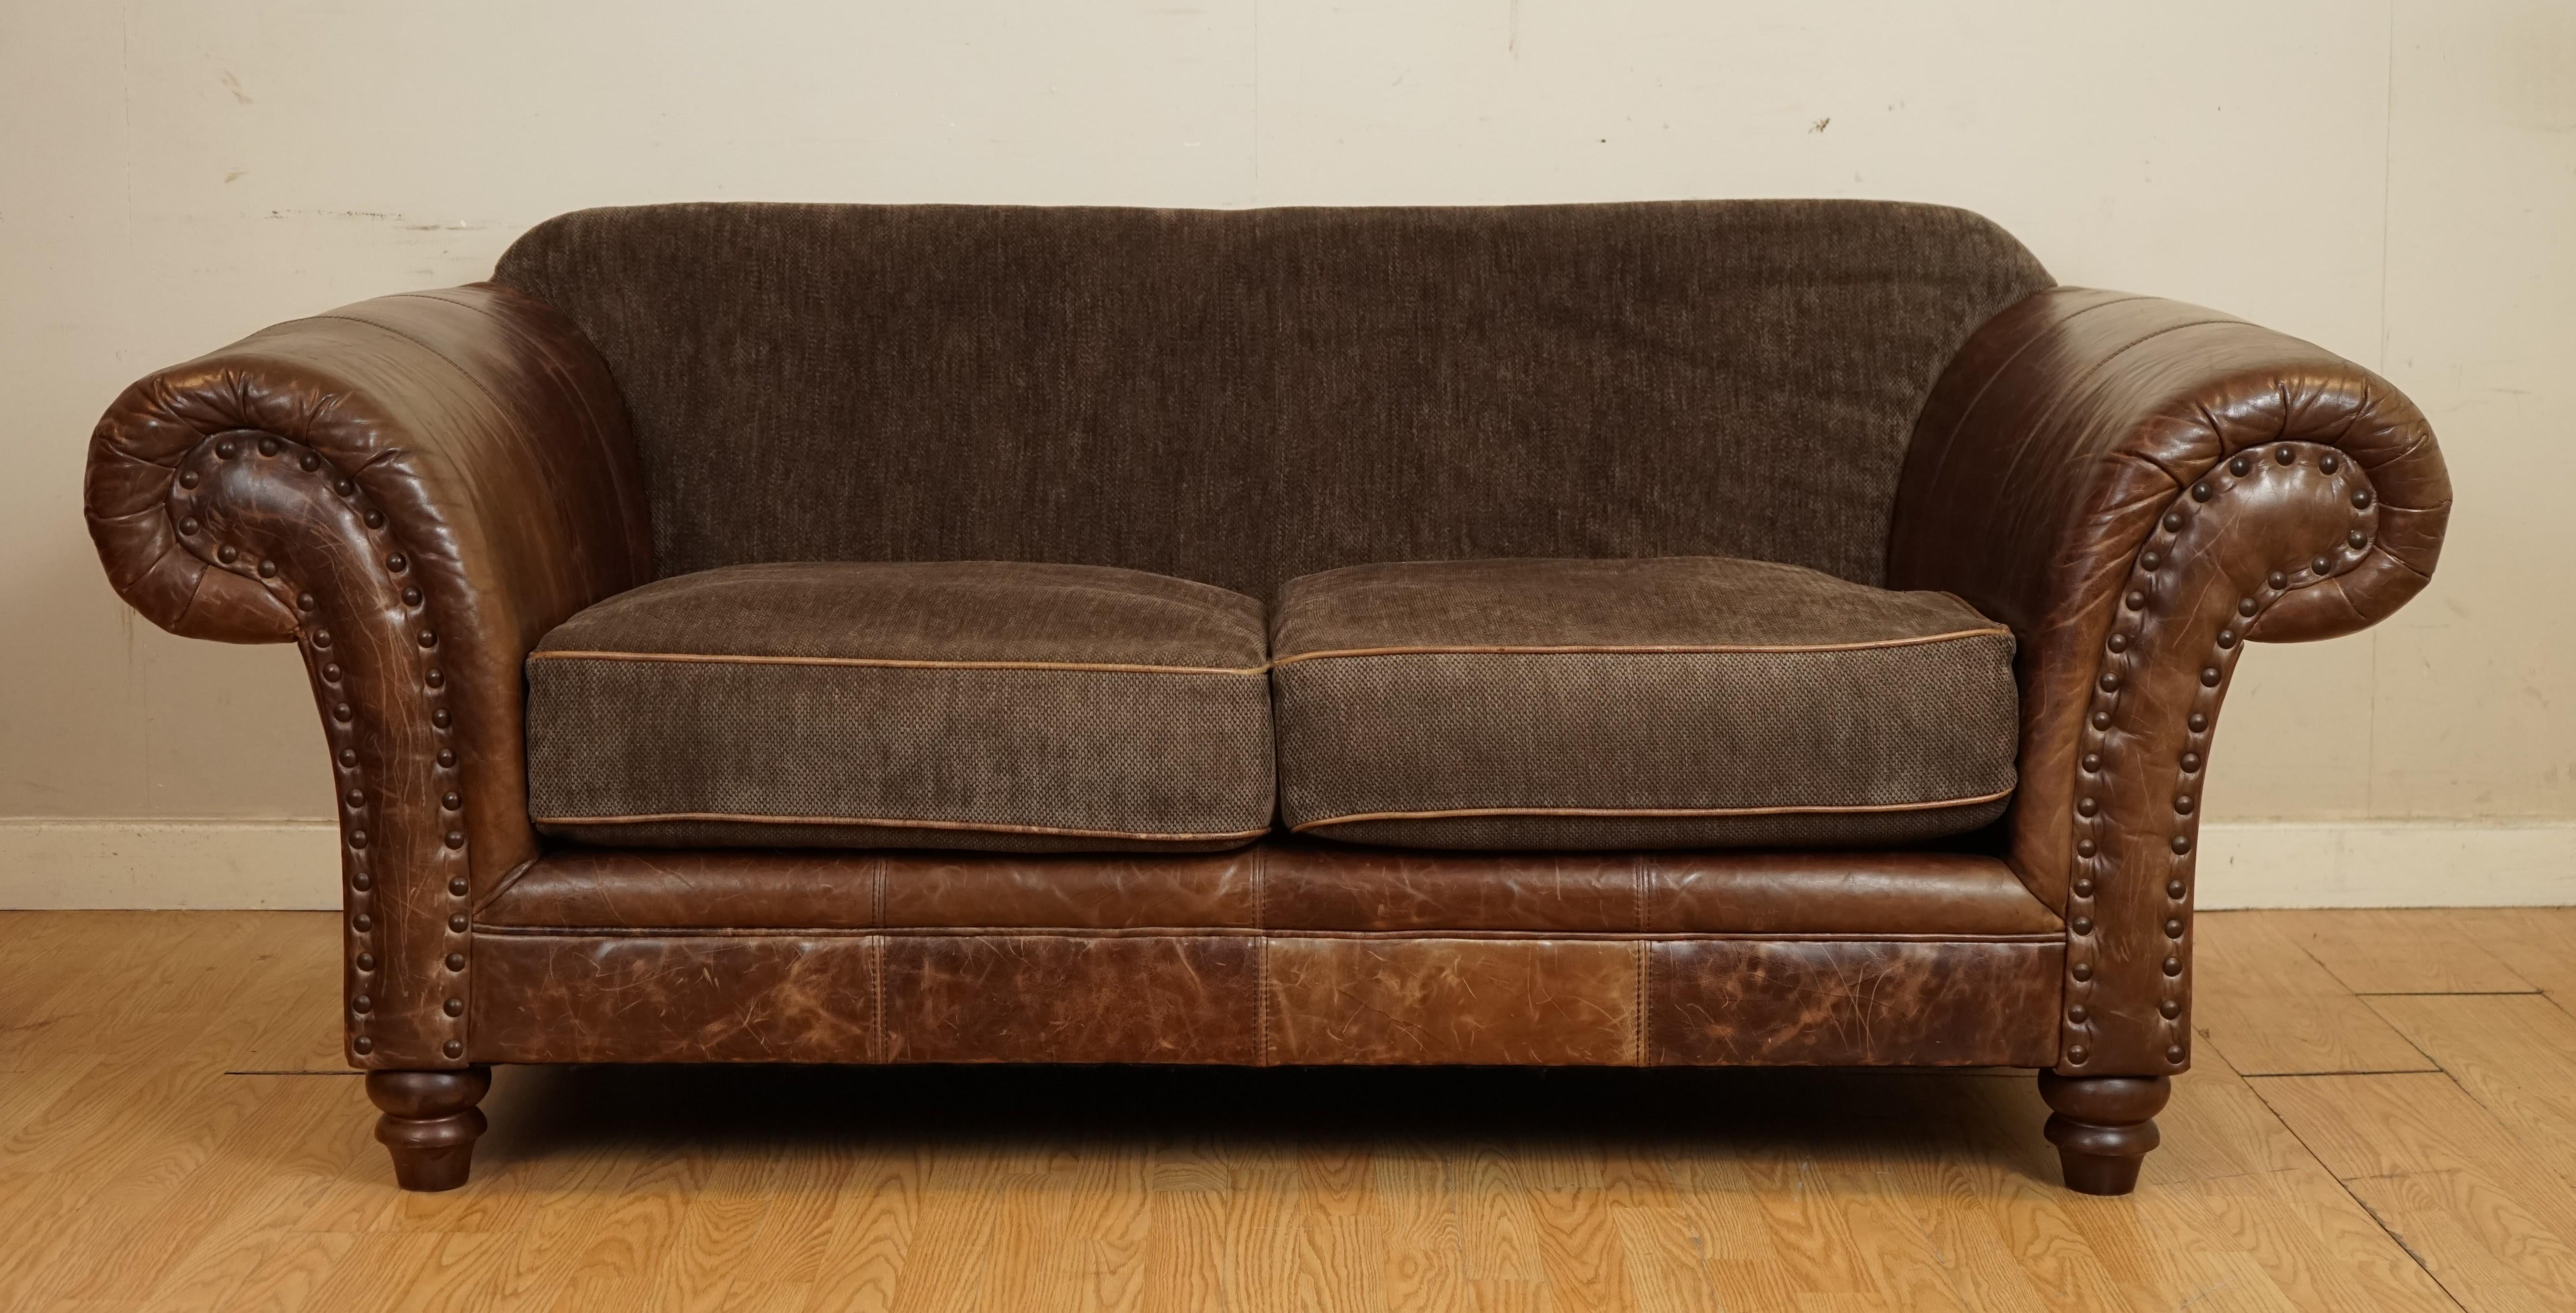 British Alexander & James Distressed Chesterfield Two Seater Leather and Fabric Sofa